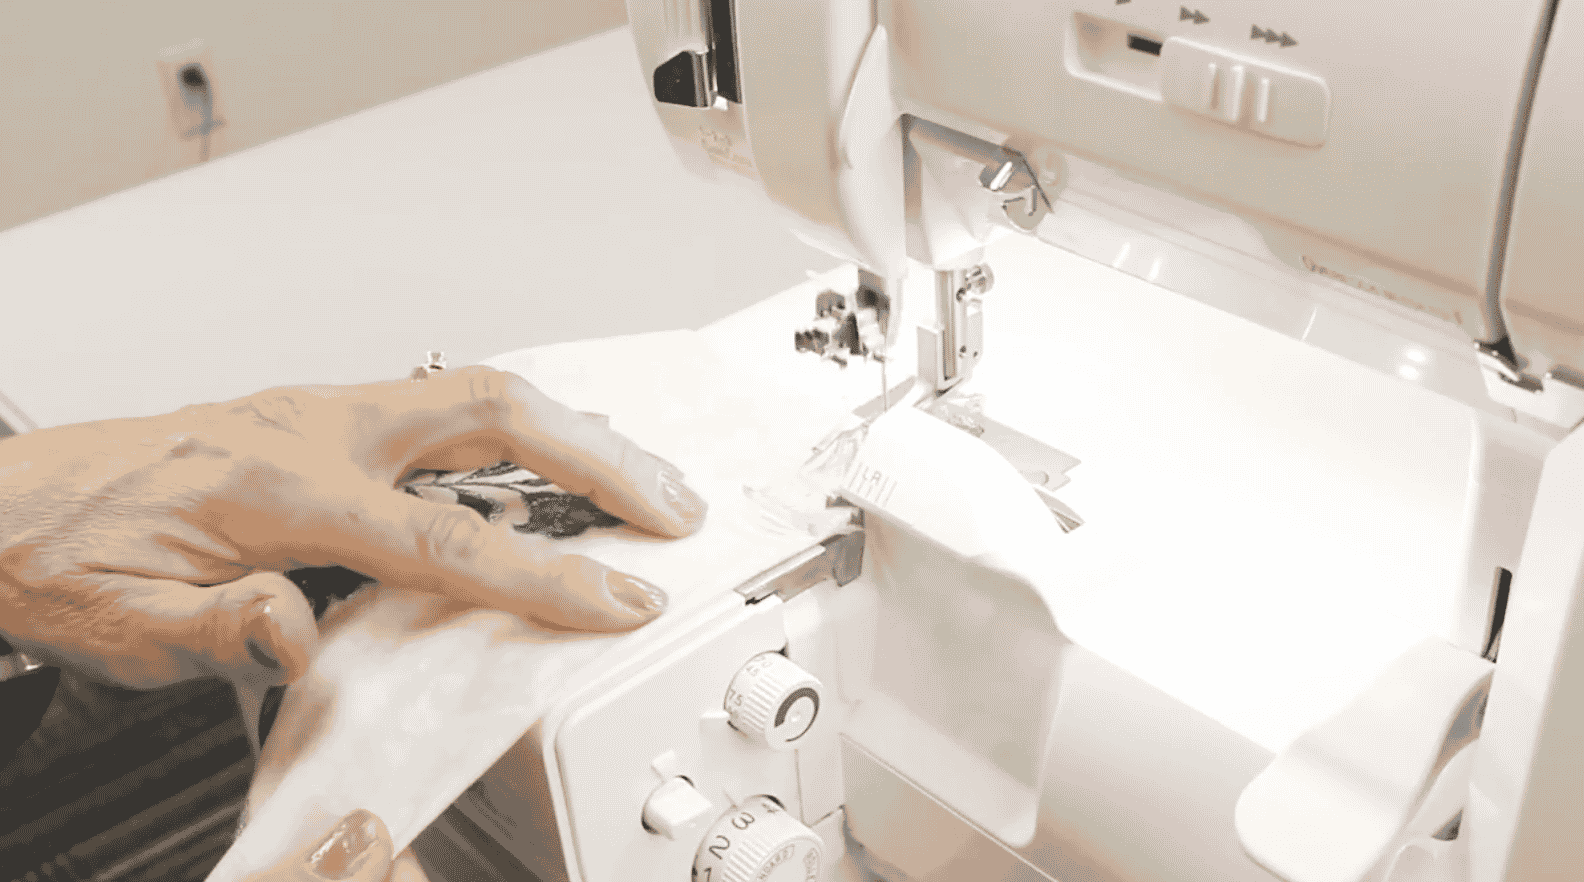 A picture containing sewing machine, appliance, indoor, person

Description automatically generated